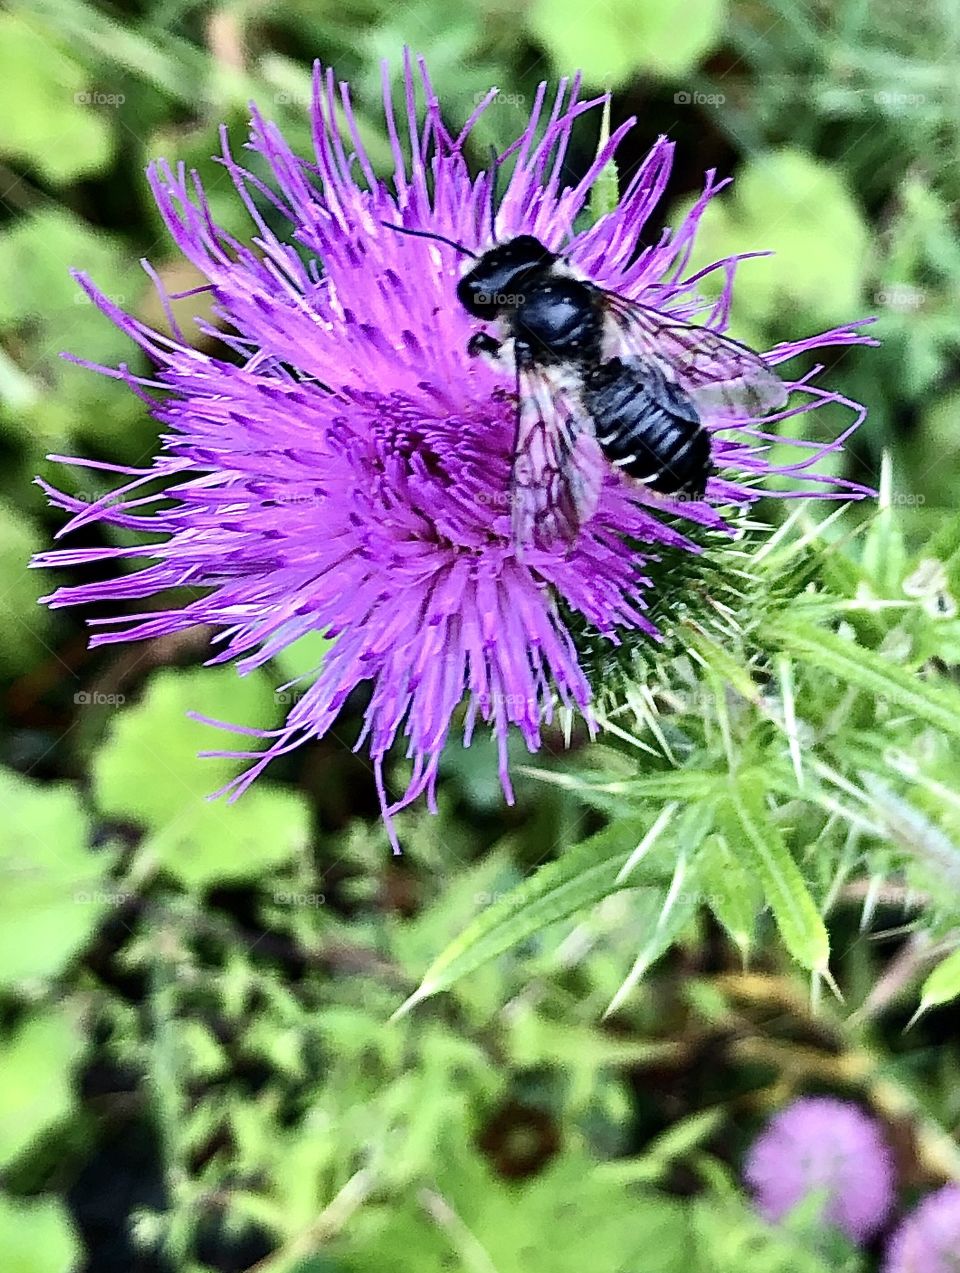 Unarmed leafcutter bee on bull thistle